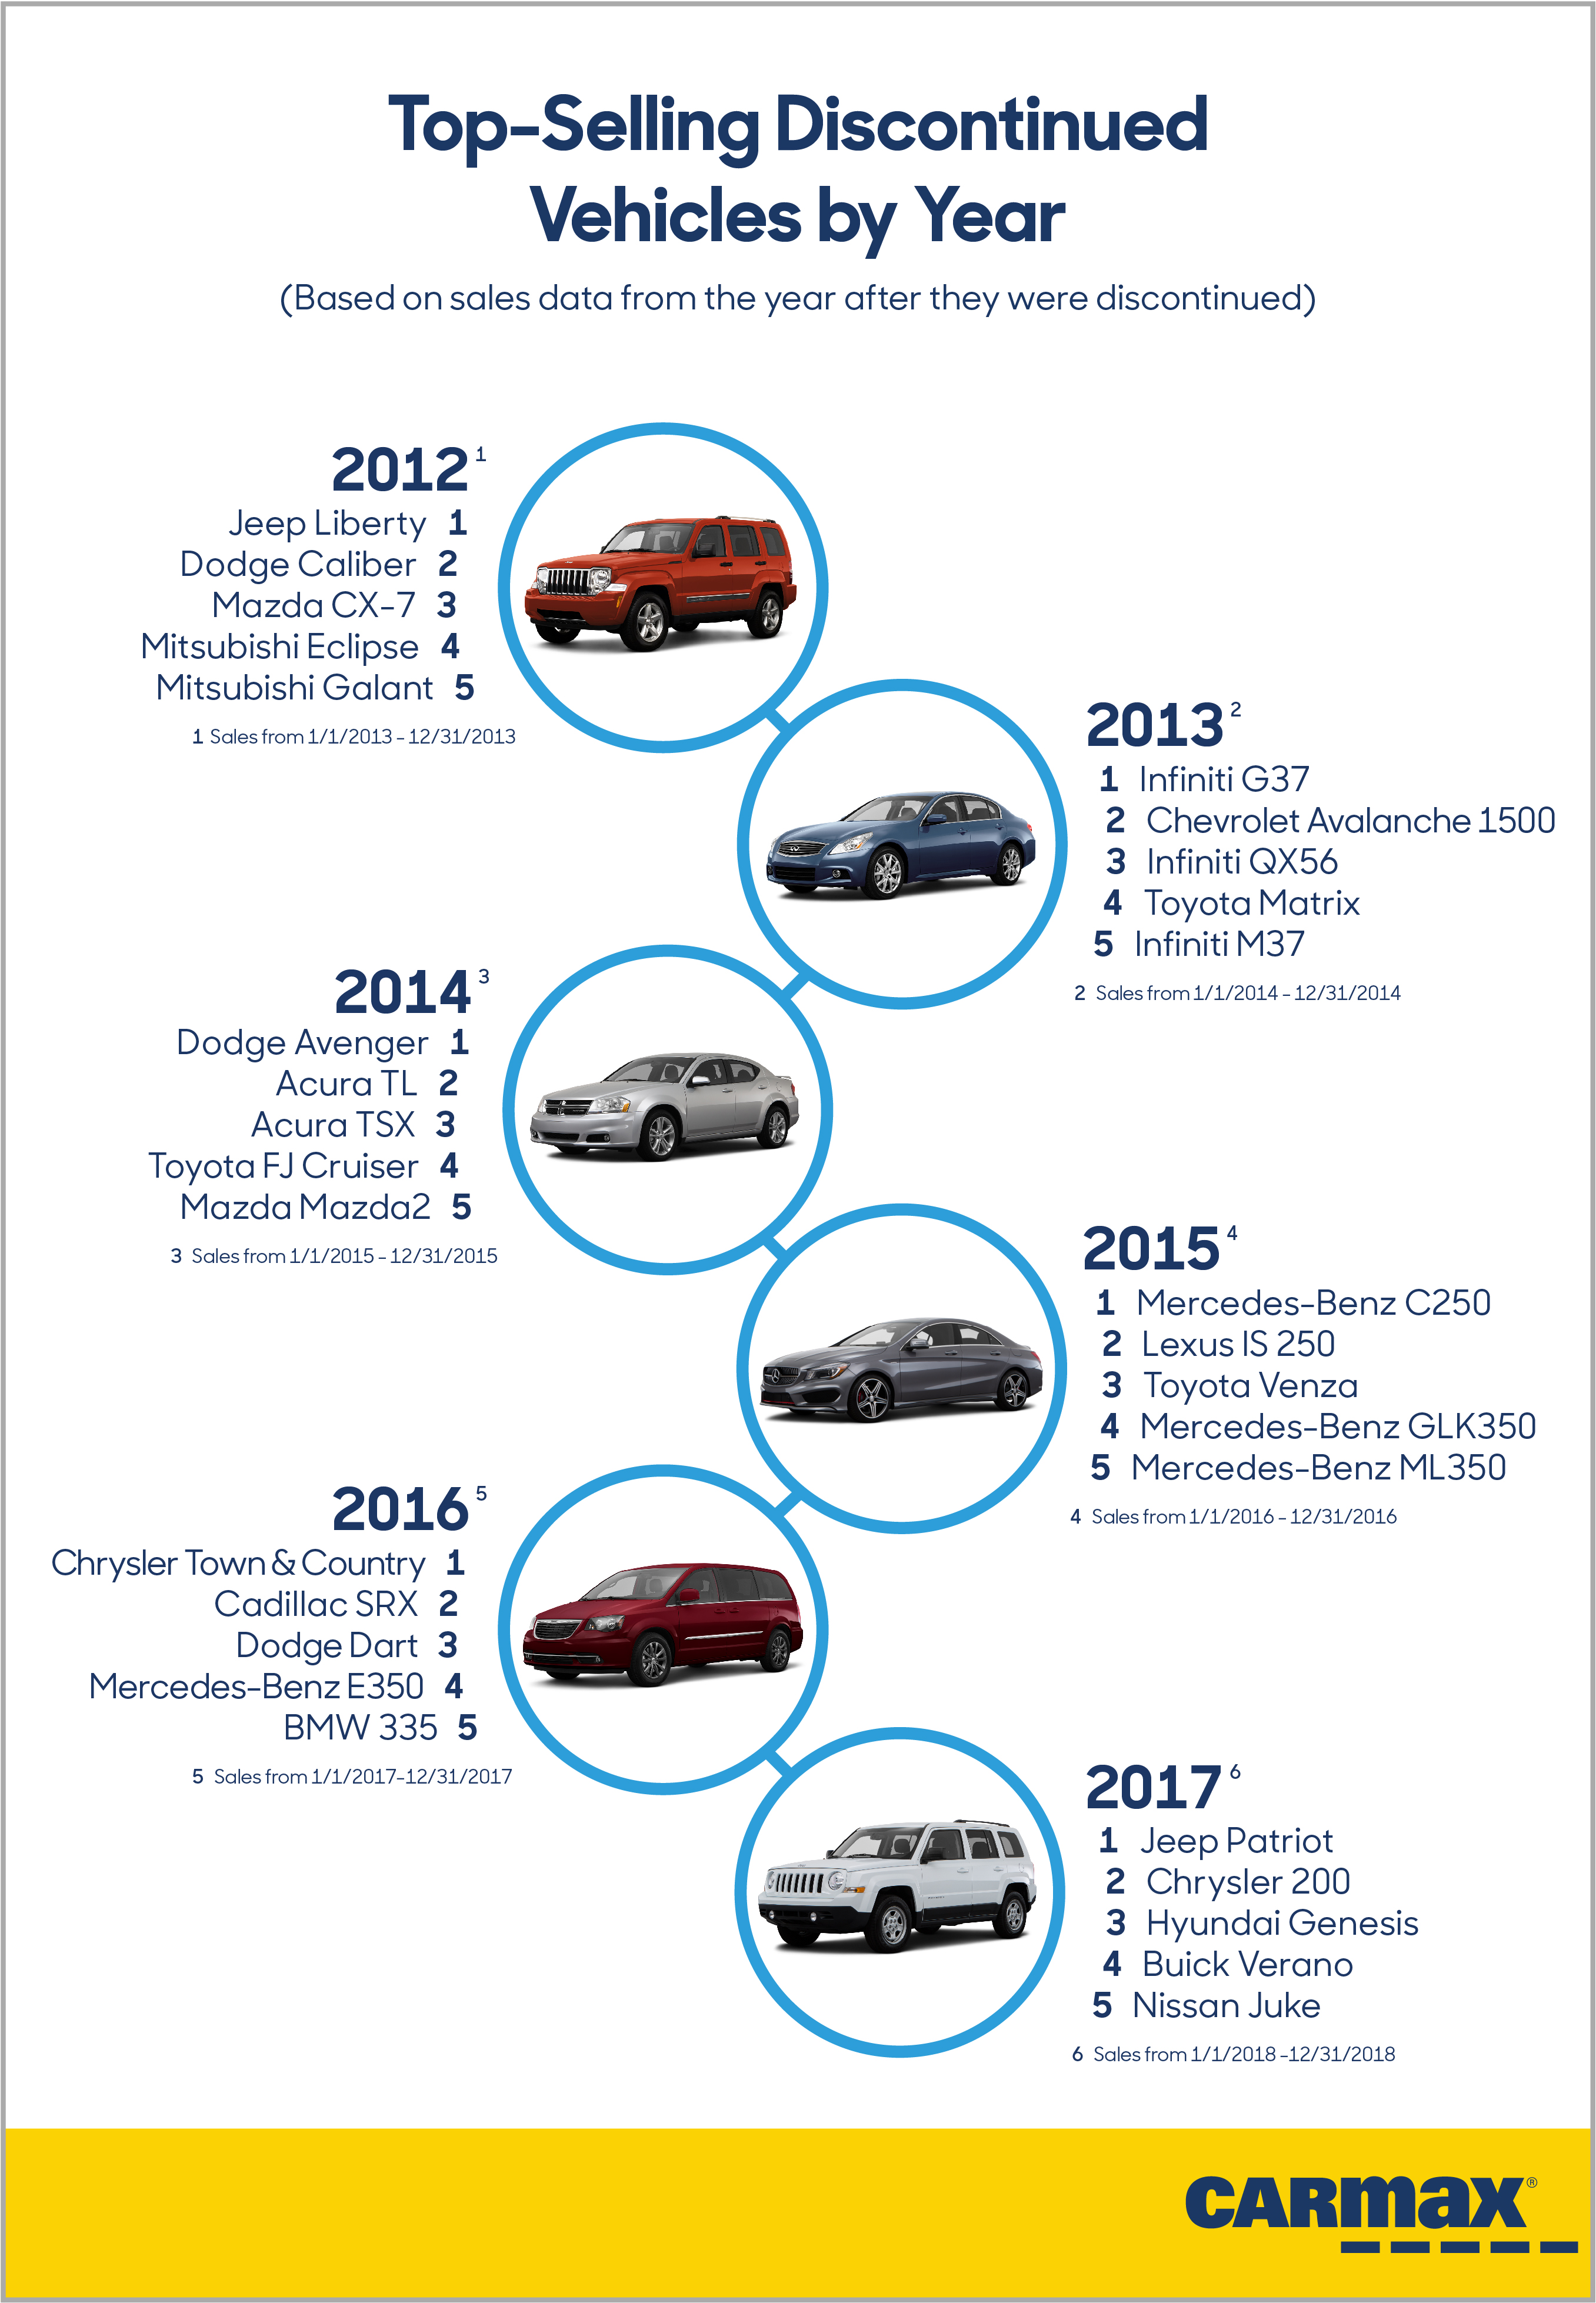 Discontinued Vehicles